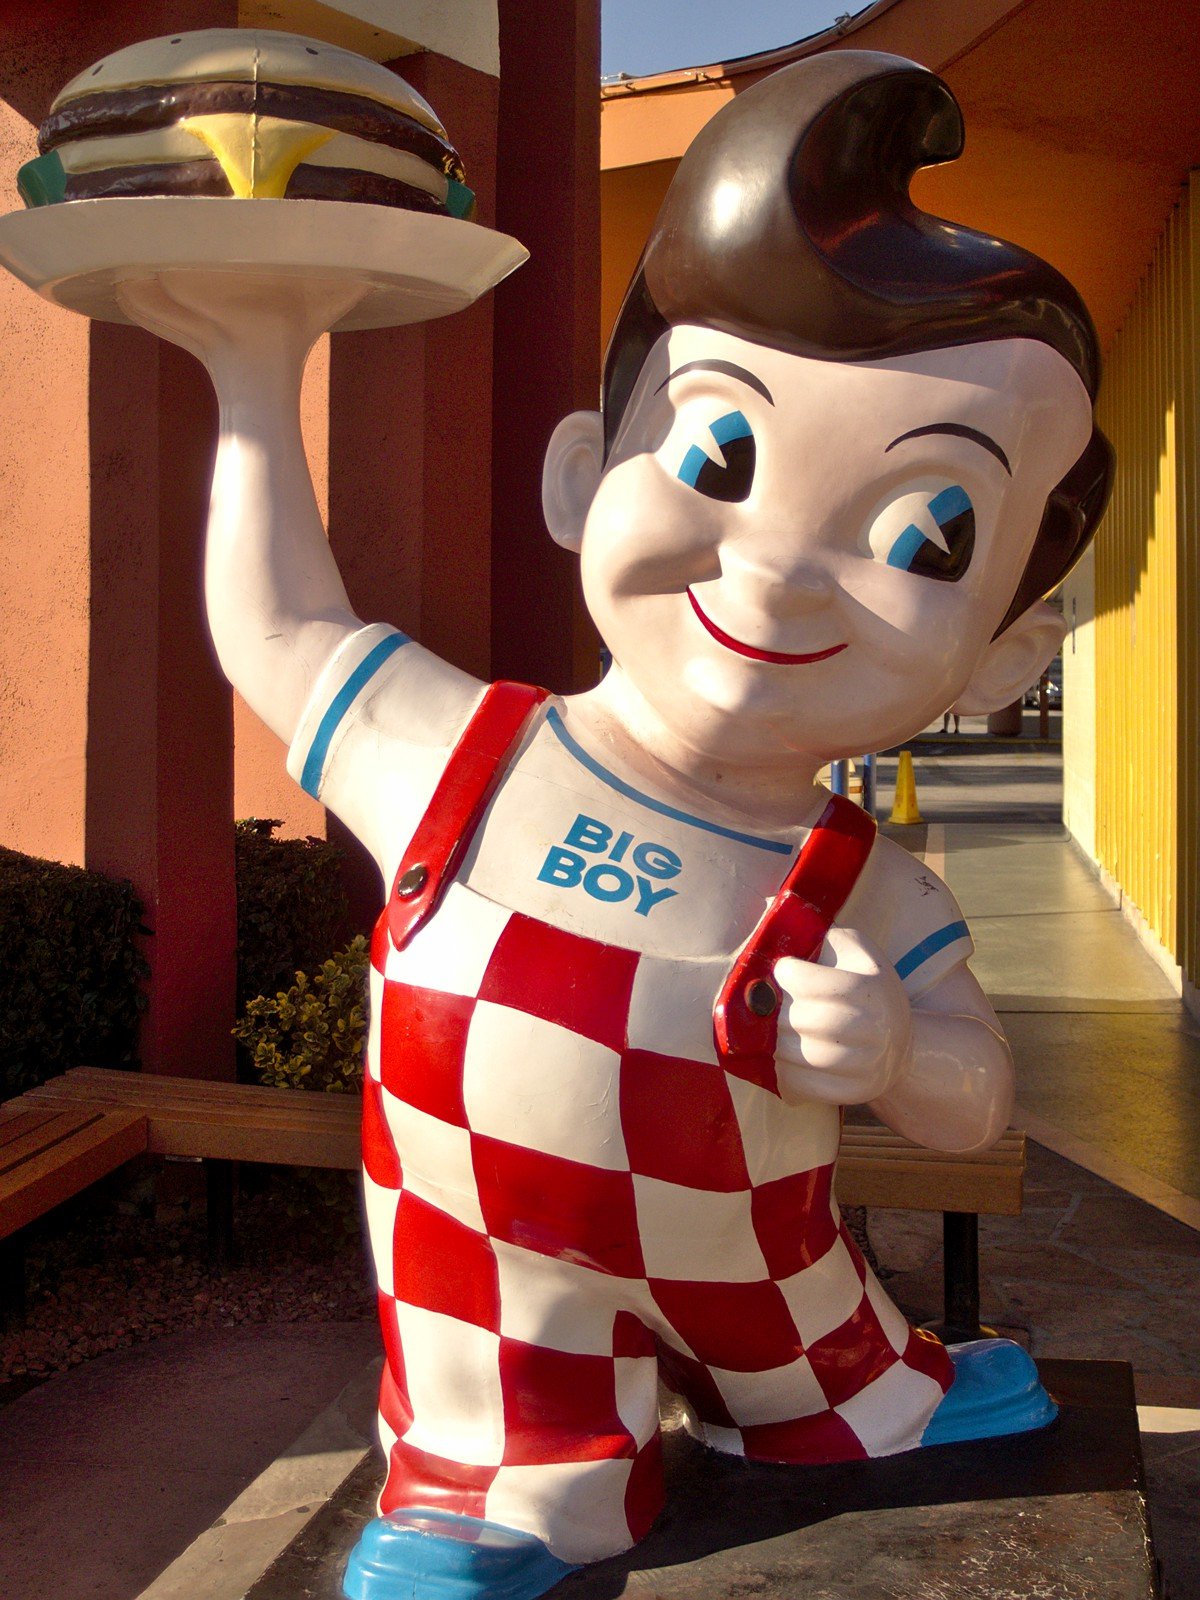 Big Boy Restaurants Replace Iconic Mascot With Old 1950s Character